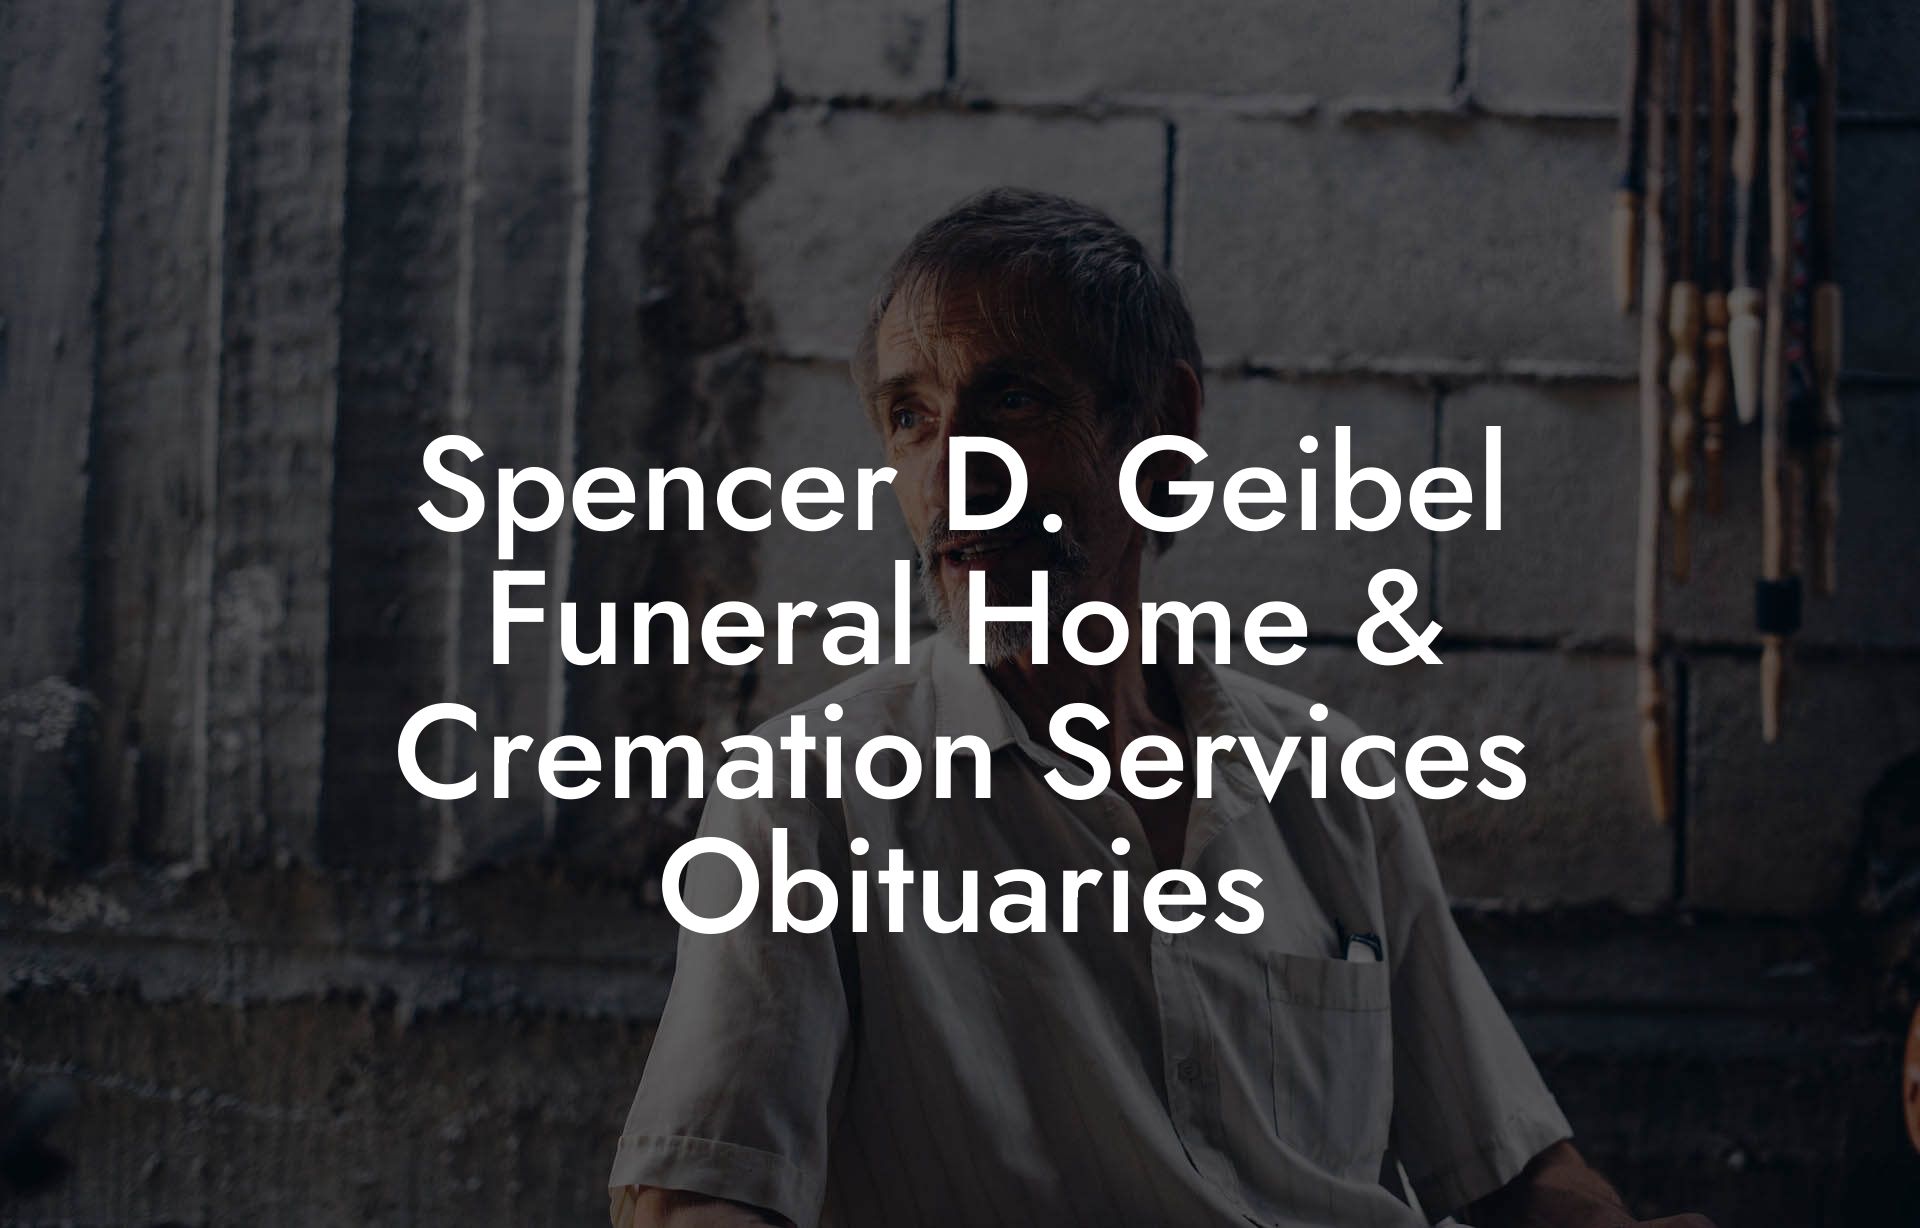 Spencer D. Geibel Funeral Home & Cremation Services Obituaries